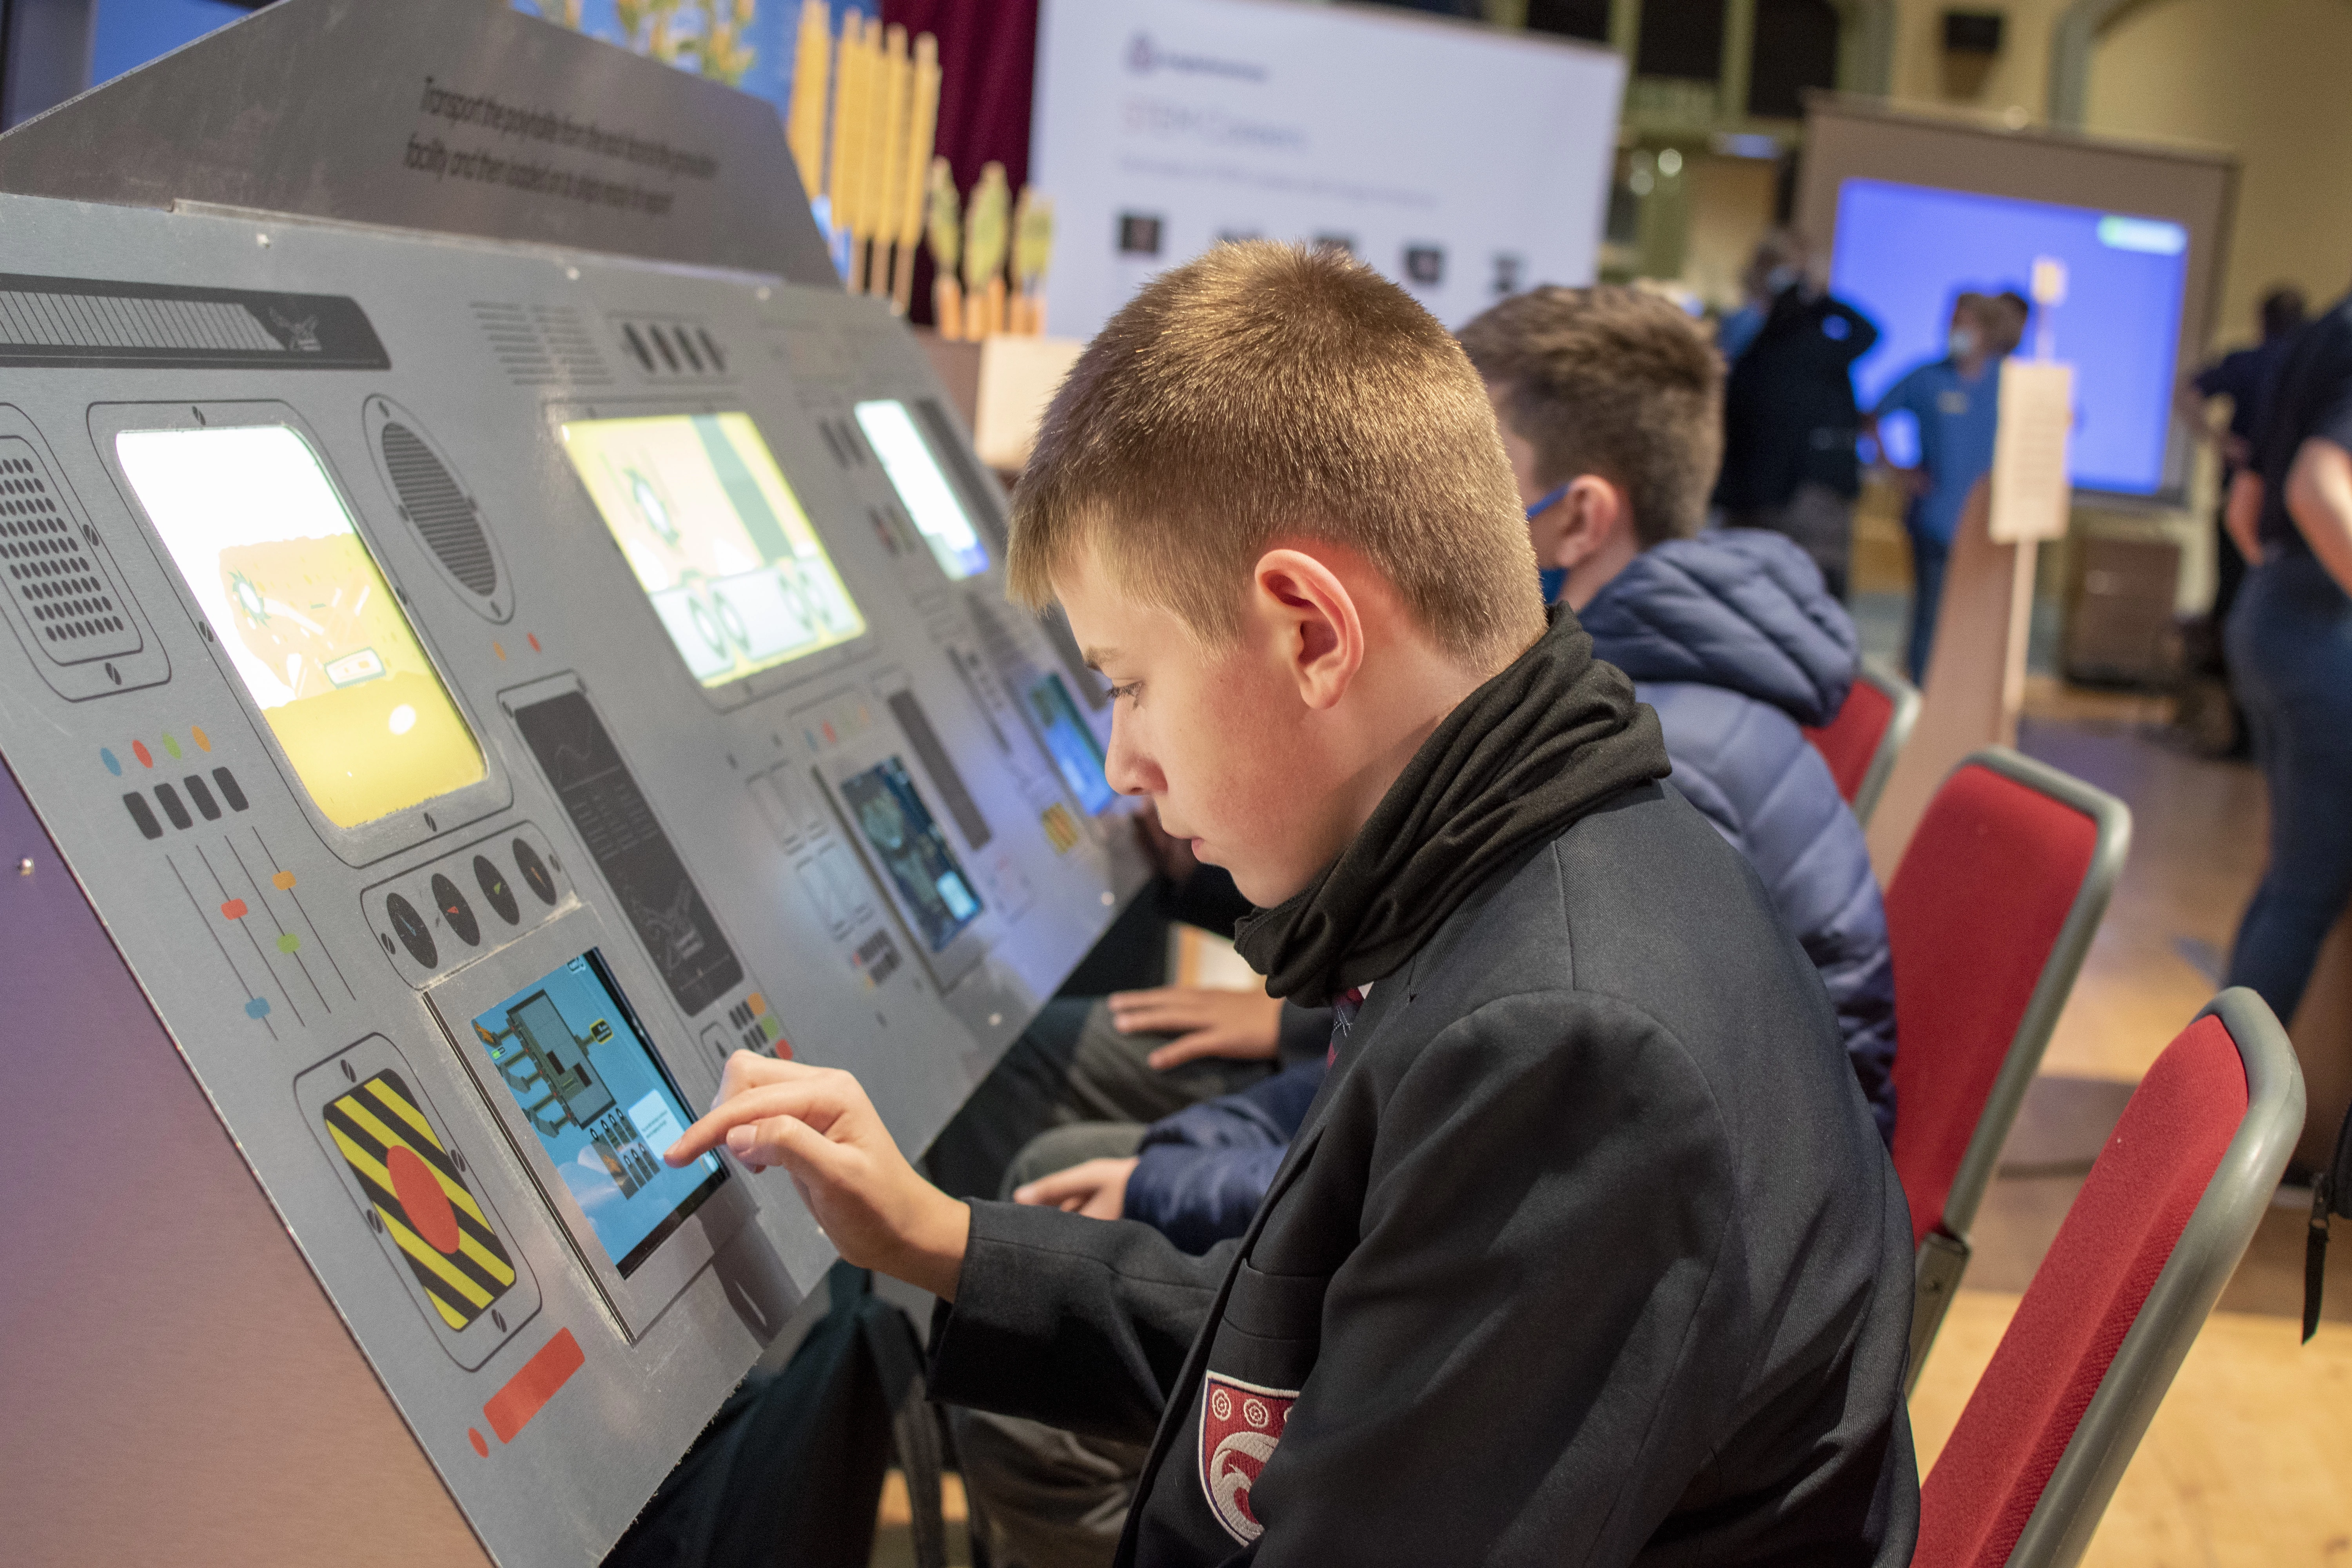 Students play the interactive games at Anglo American’s stand during Scarborough Science and Engineering Week